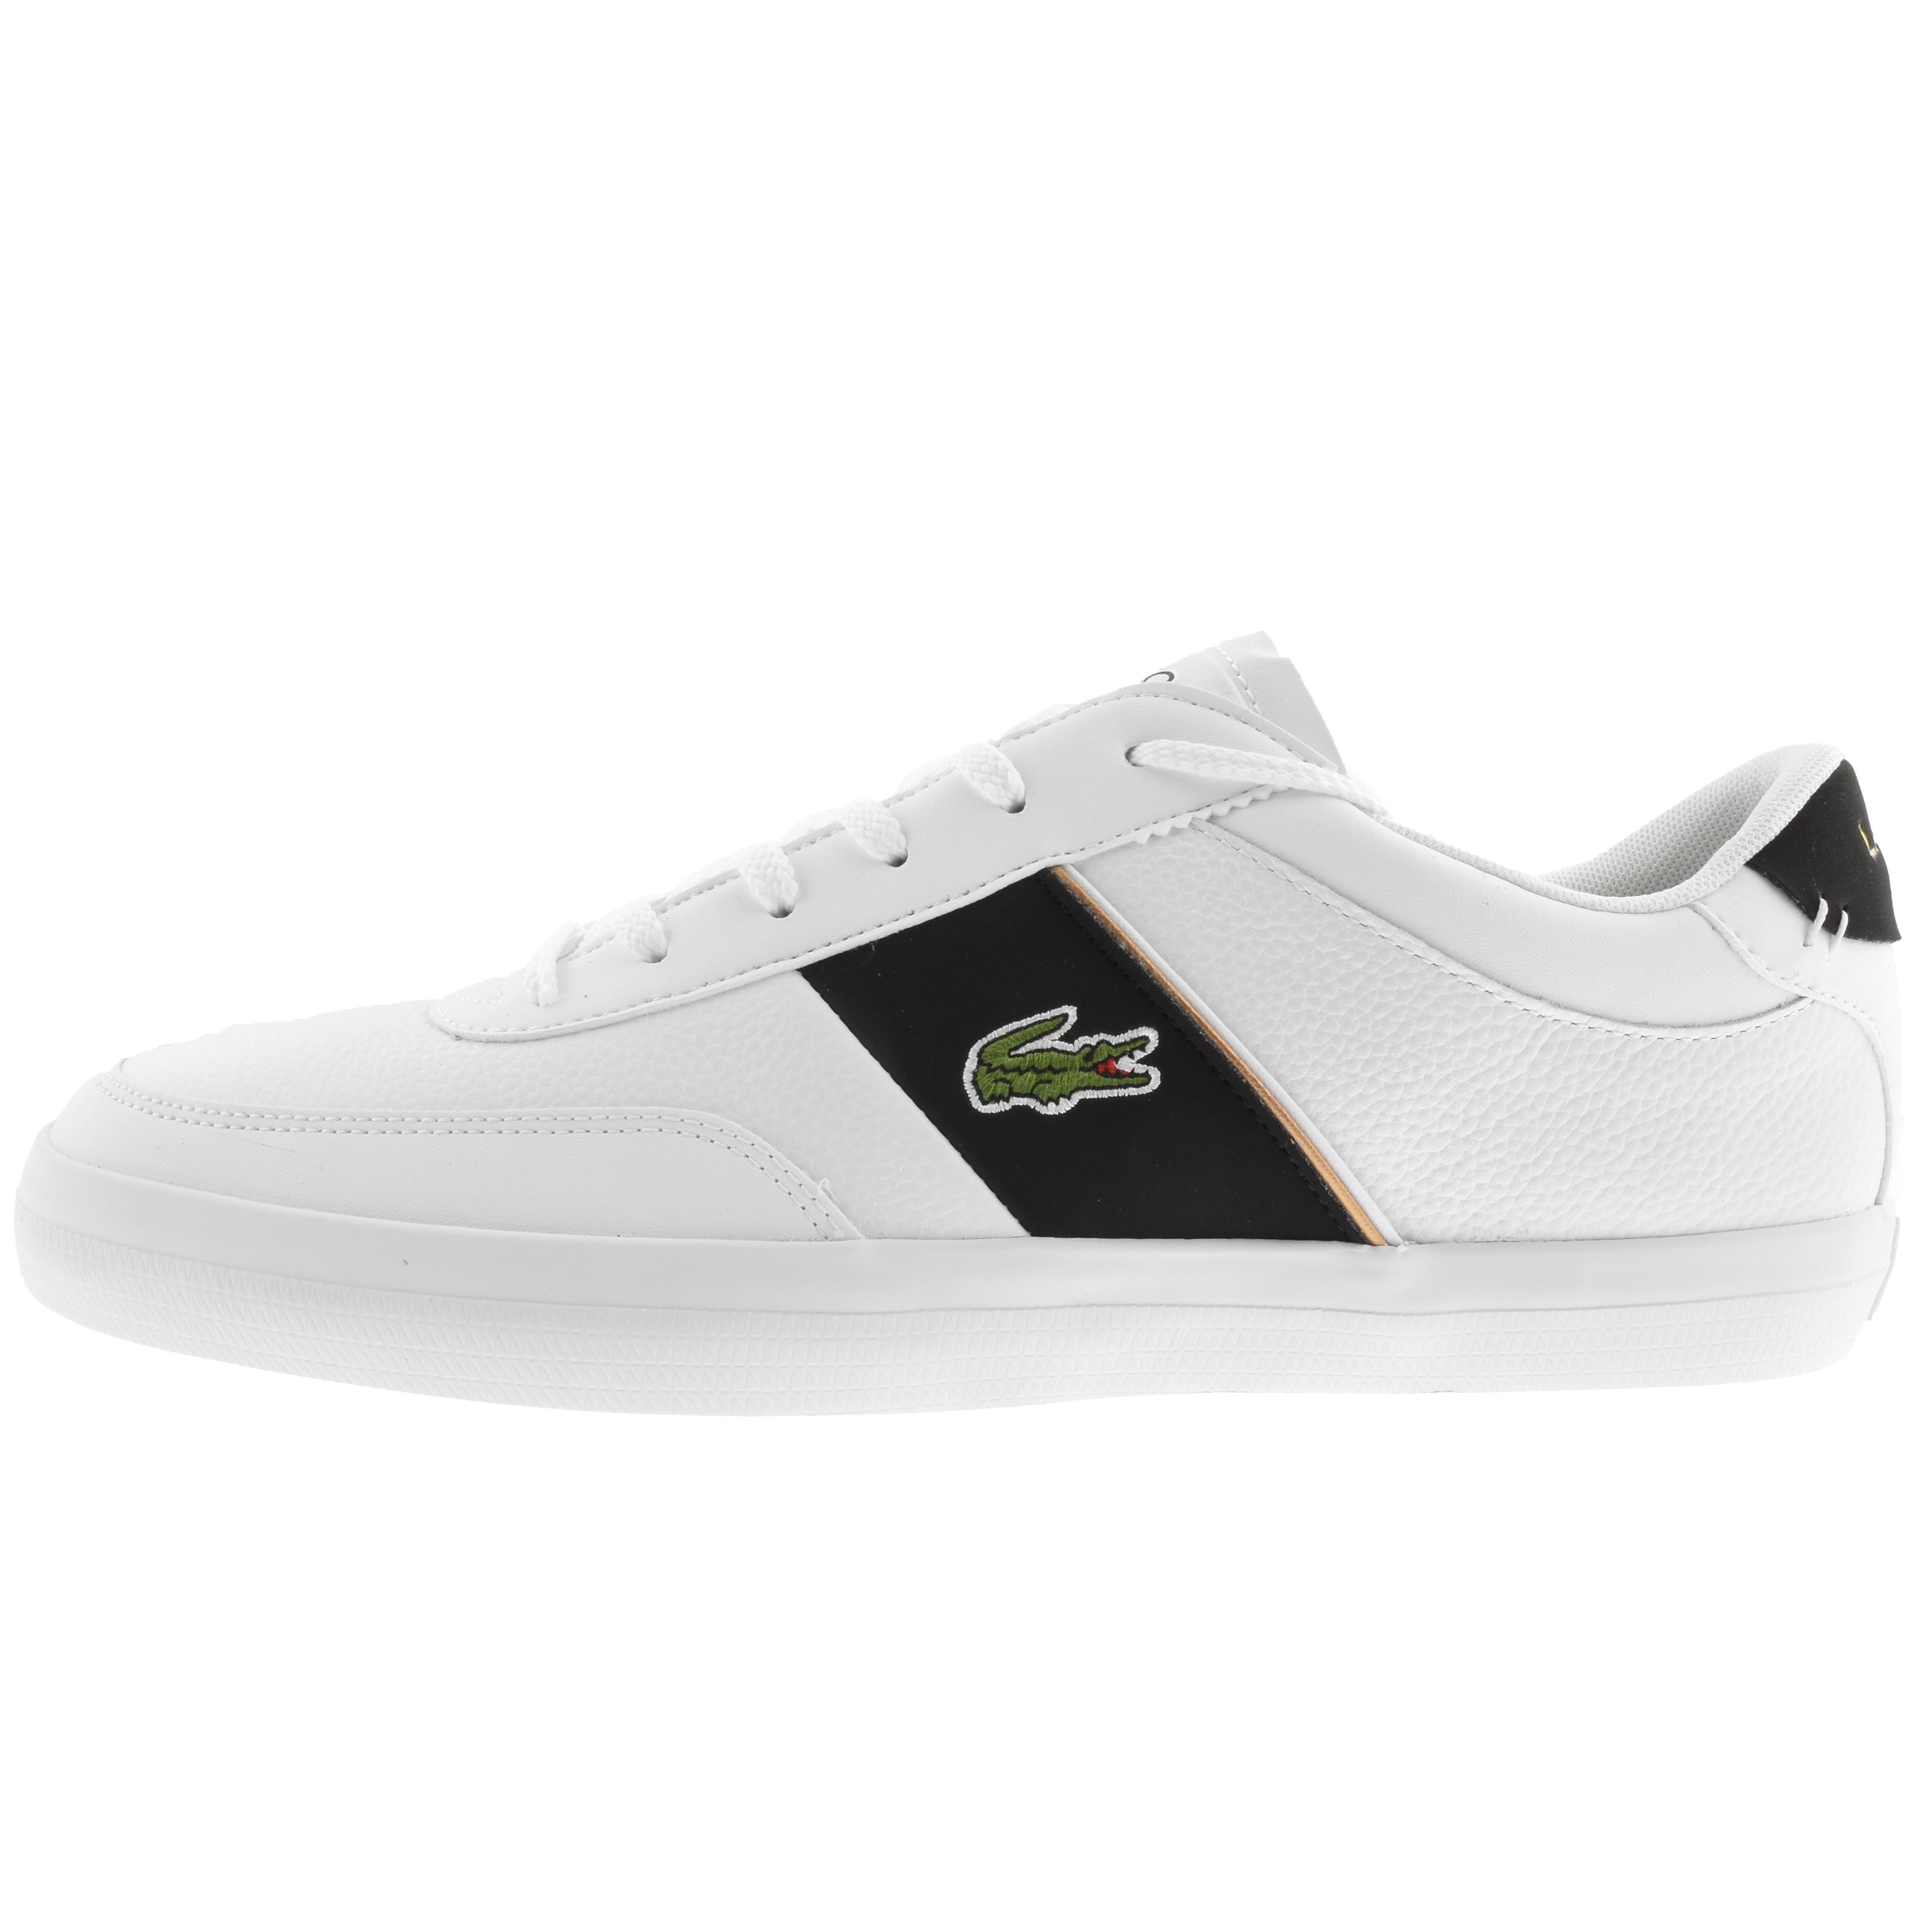 Lacoste Leather Court Master 319 in White/Black (White) for Men - Lyst